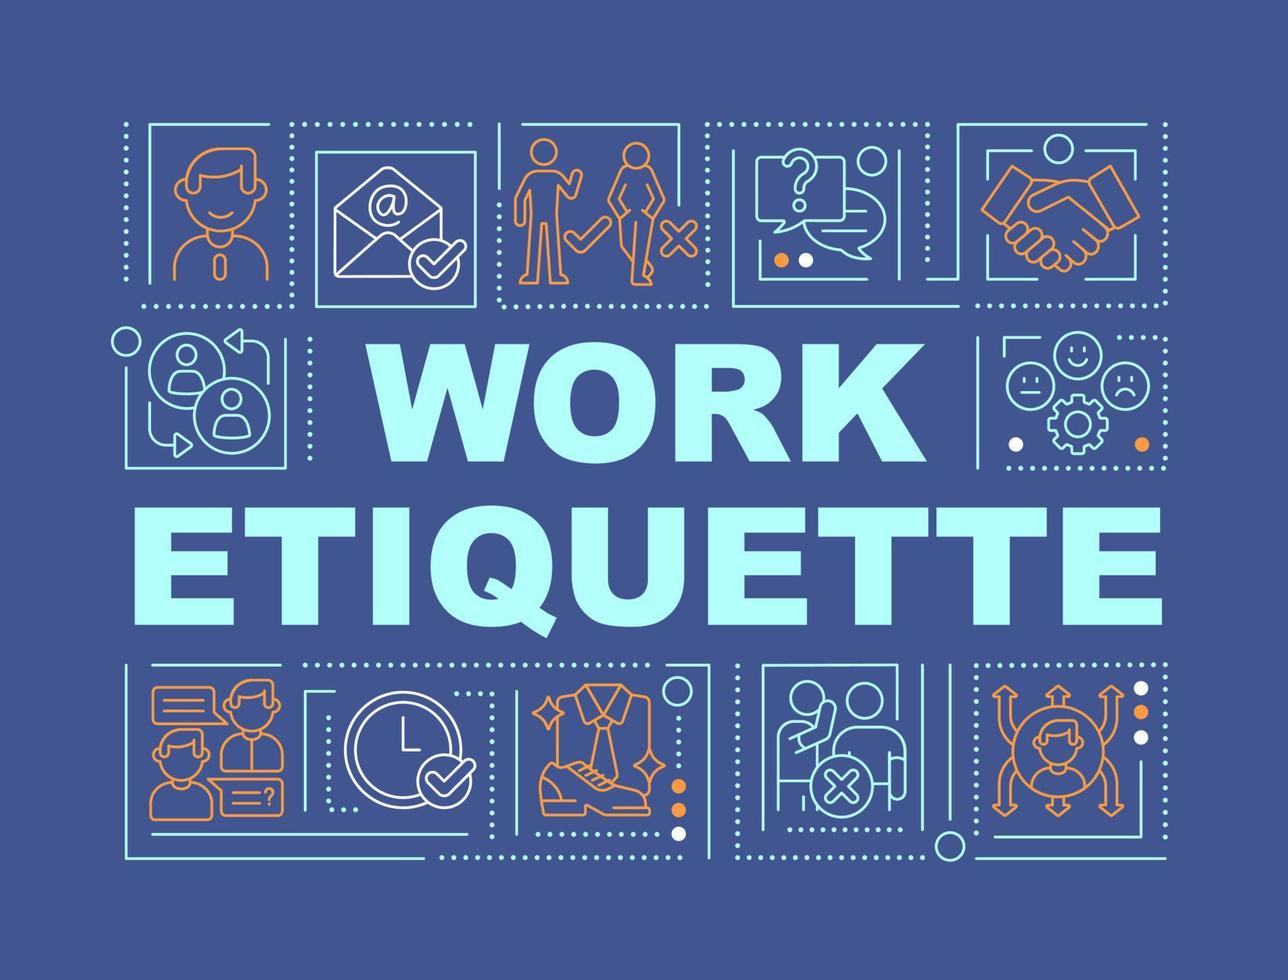 Work etiquette word concepts dark blue banner. Workplace manners and behavior. Infographics with icons on color background. Isolated typography. Vector illustration with text.